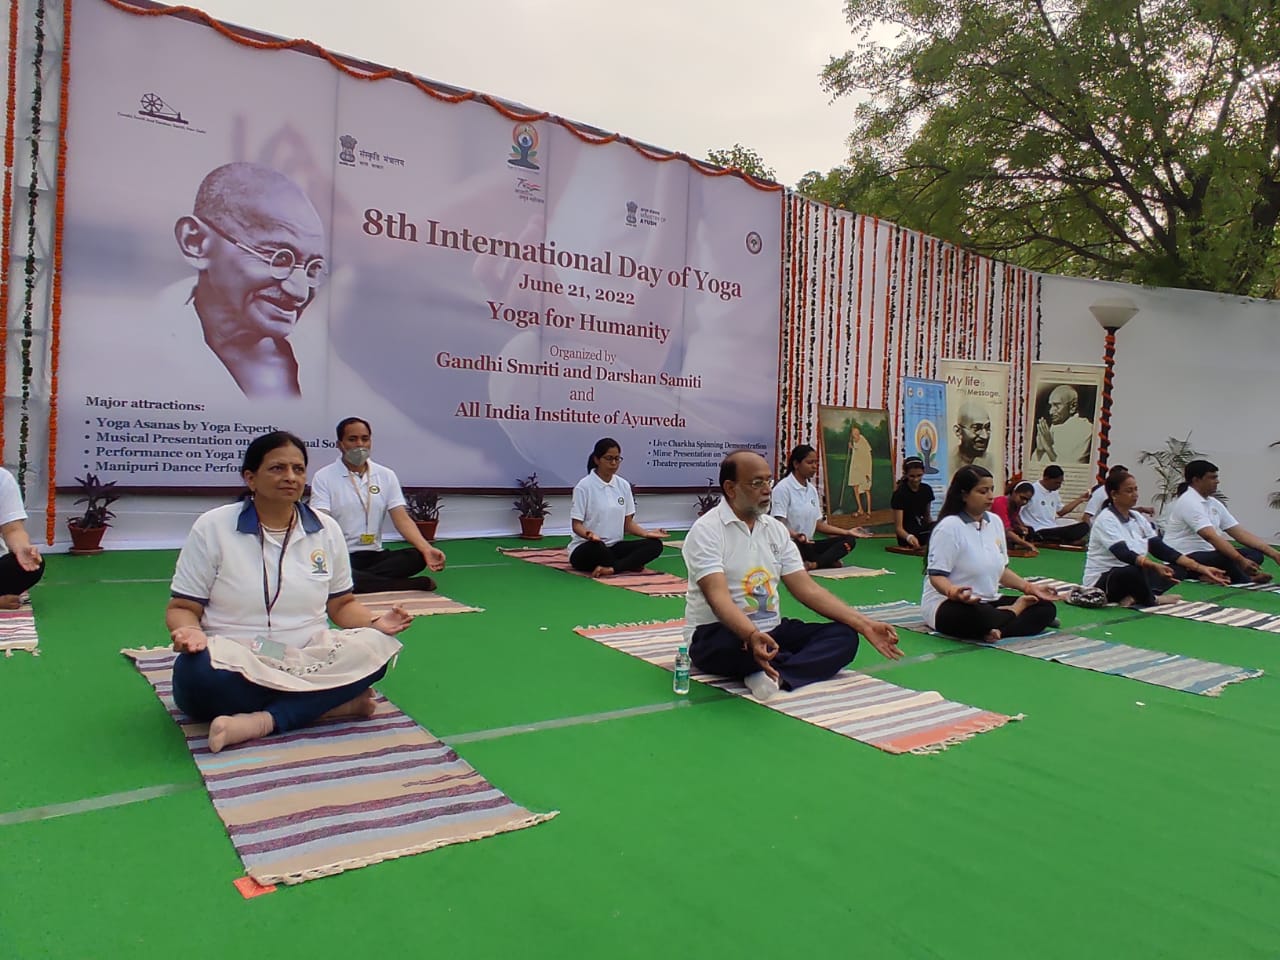 You are currently viewing All India Institute of Ayurveda, Under Ministry of Ayush, Celebrates International Day of Yoga at Gandhi Darshan in New Delhi